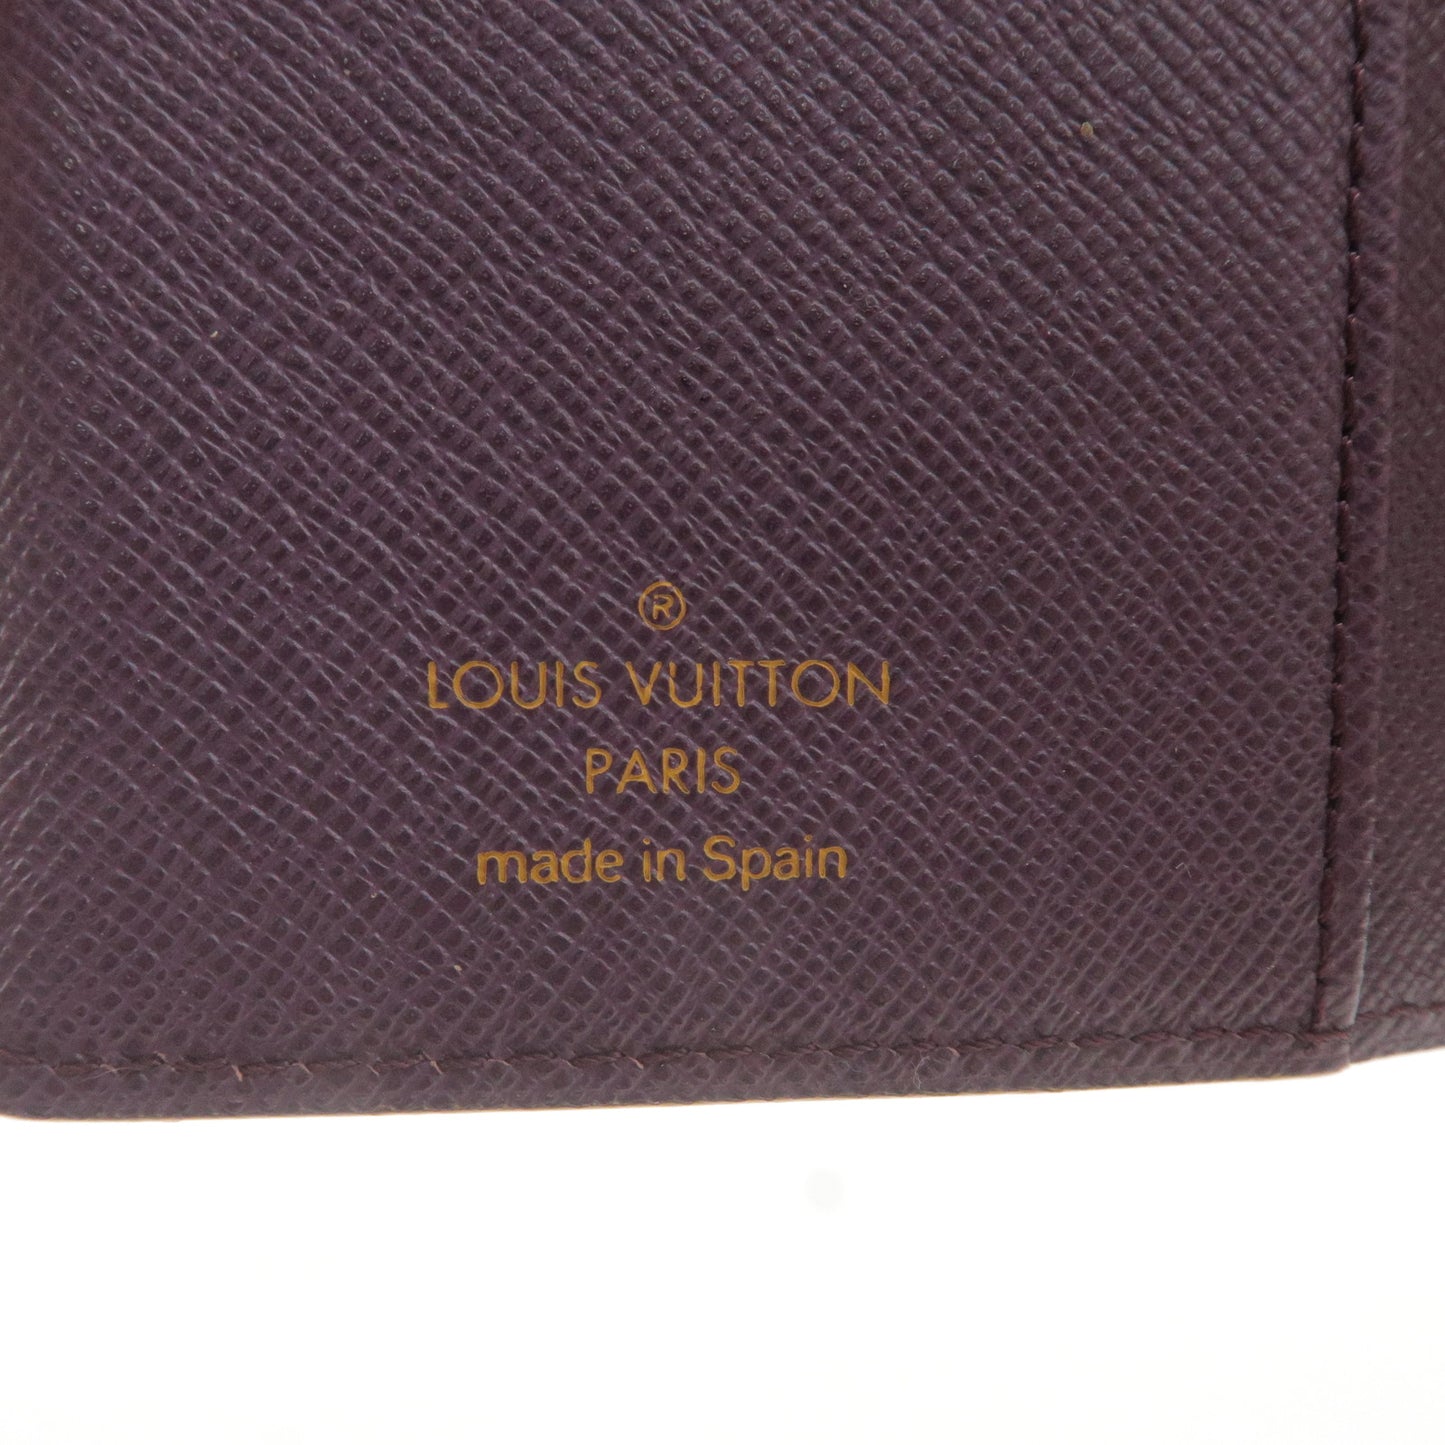 Authentic Louis Vuitton Epi Set of 2 Agenda and Wallet R20079 M63489 Used F/S